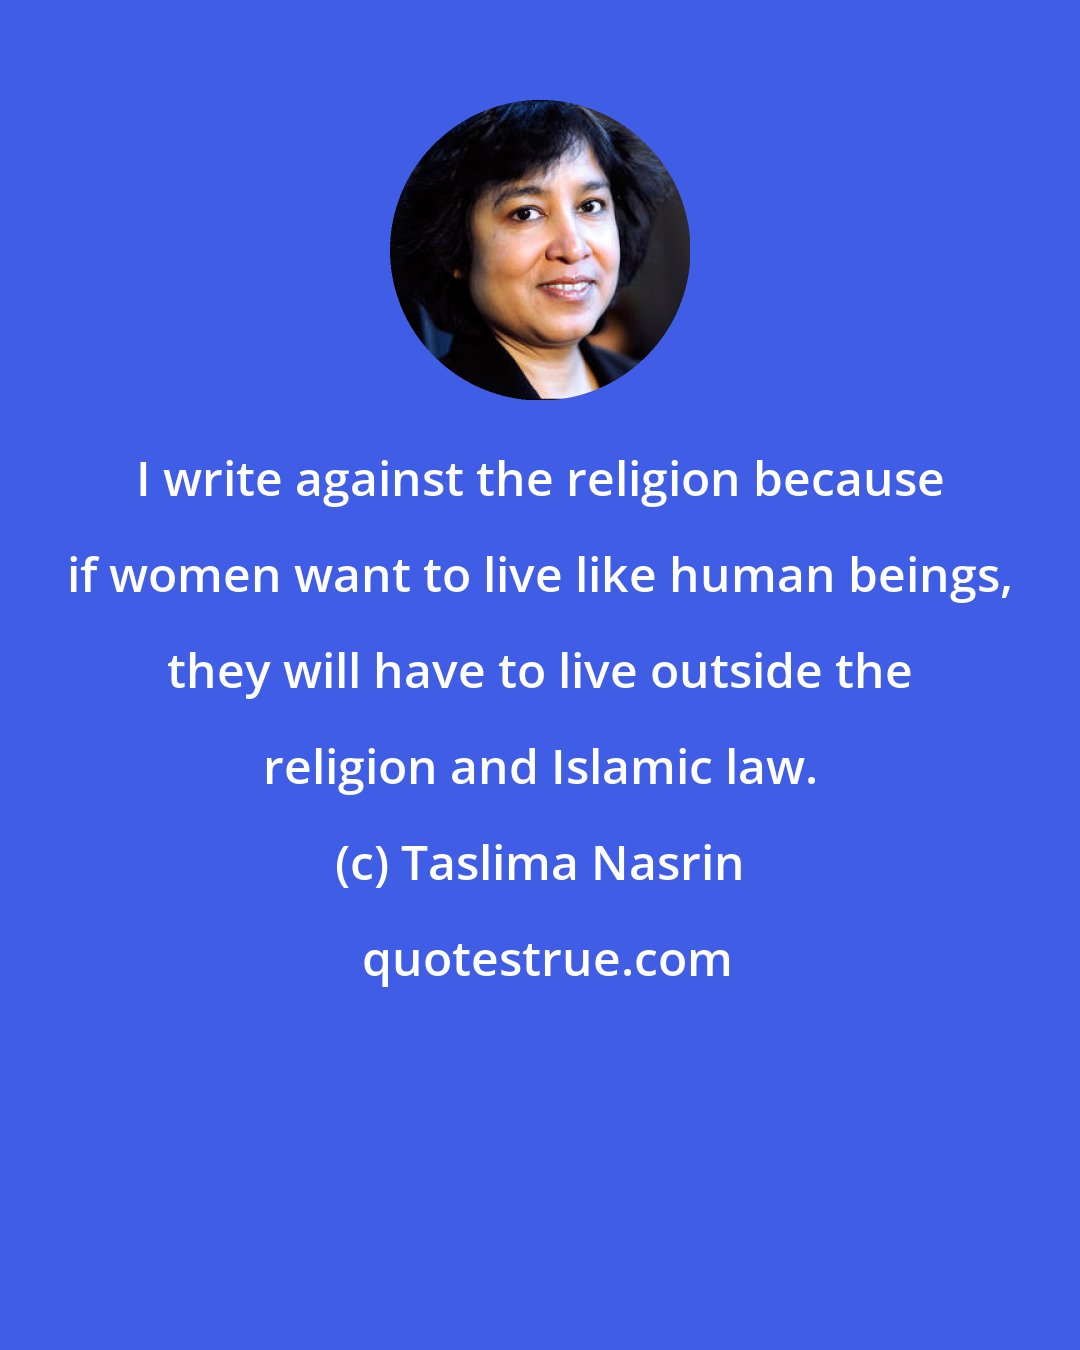 Taslima Nasrin: I write against the religion because if women want to live like human beings, they will have to live outside the religion and Islamic law.